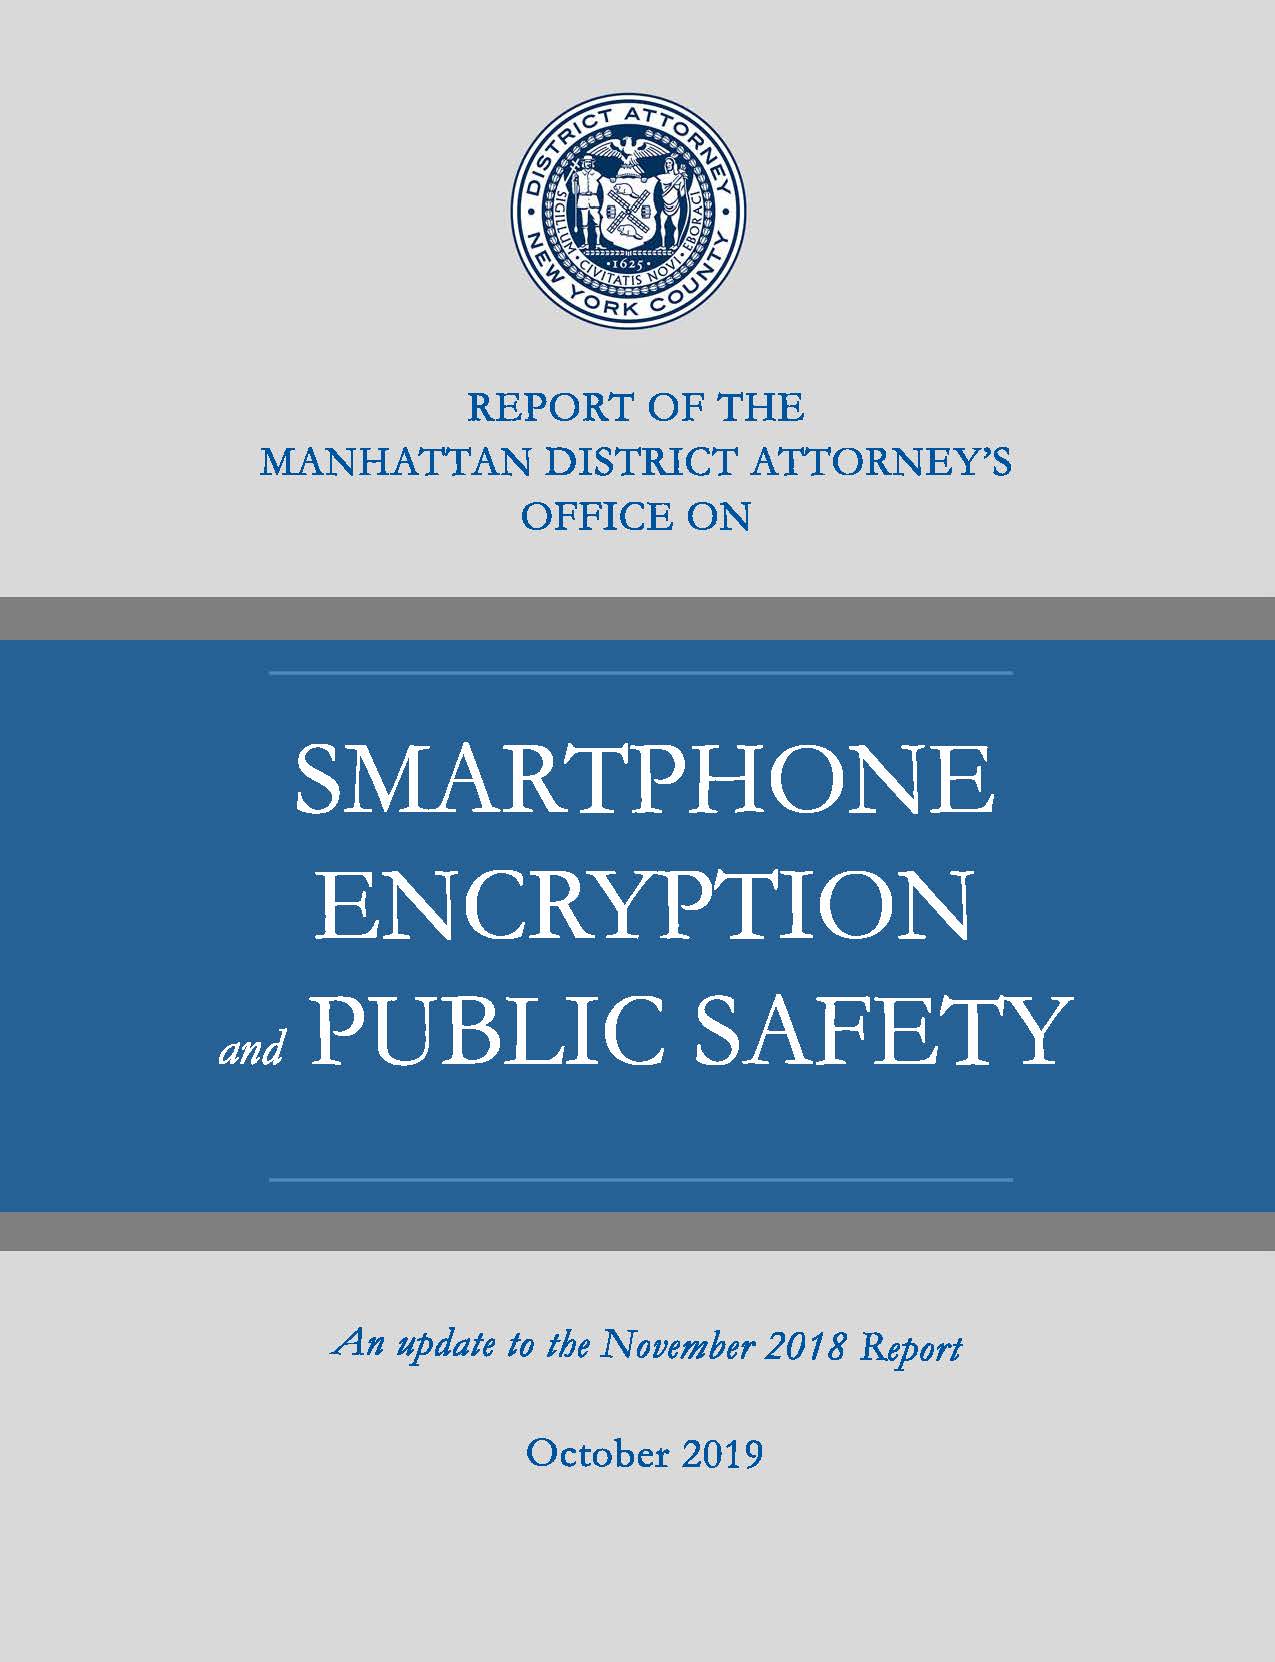 2019 Report on Smartphone Encryption and Public Safety Title Slide